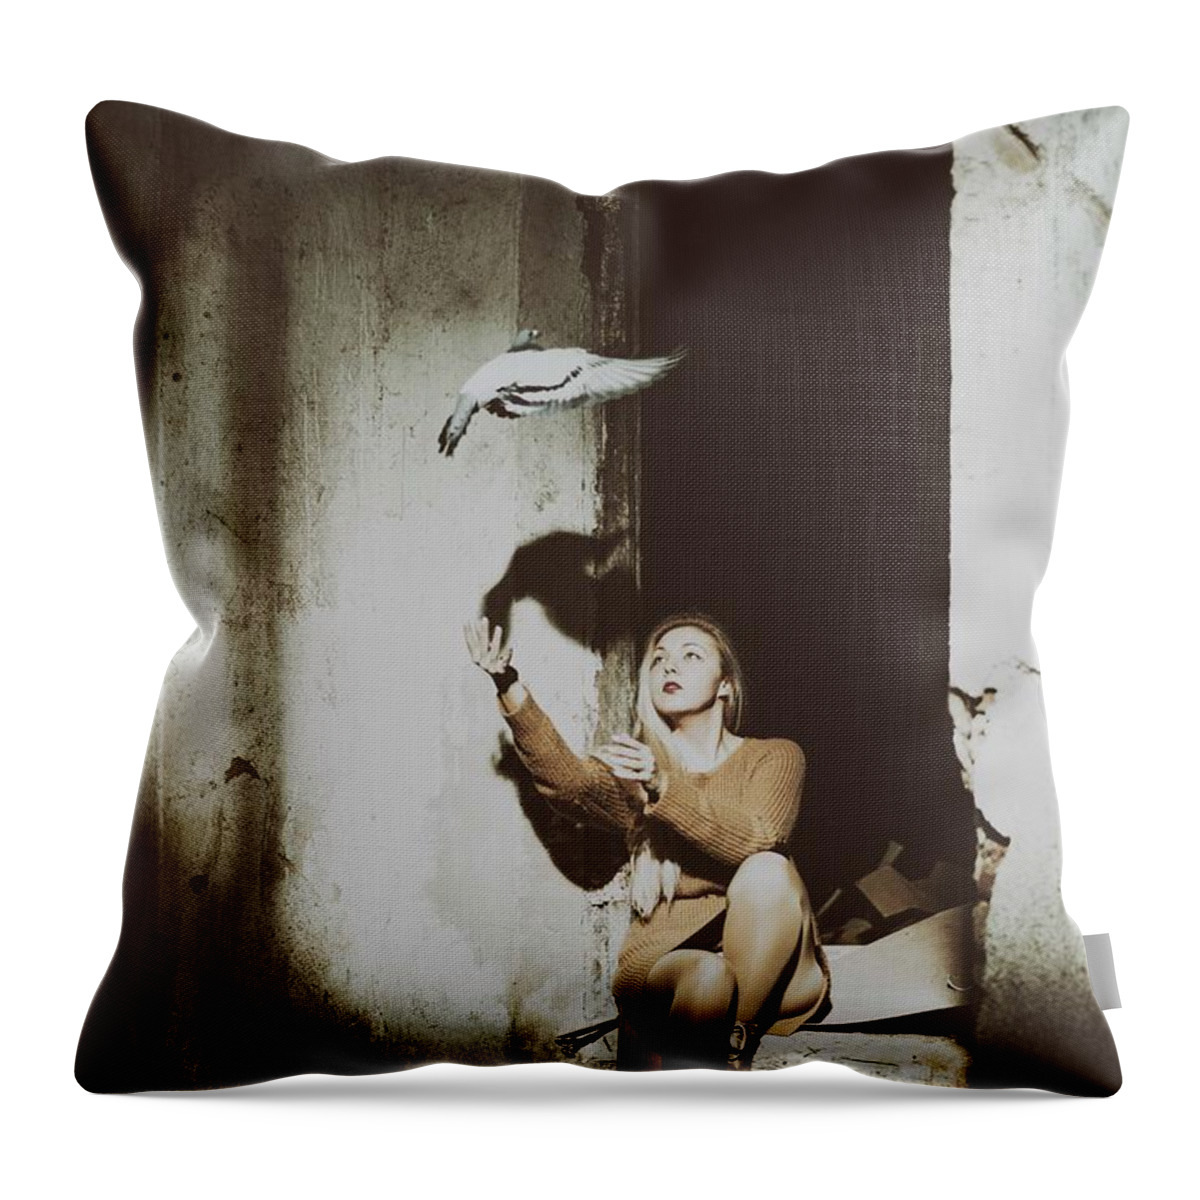 Photo Throw Pillow featuring the photograph -freedom- by Lukas Duran